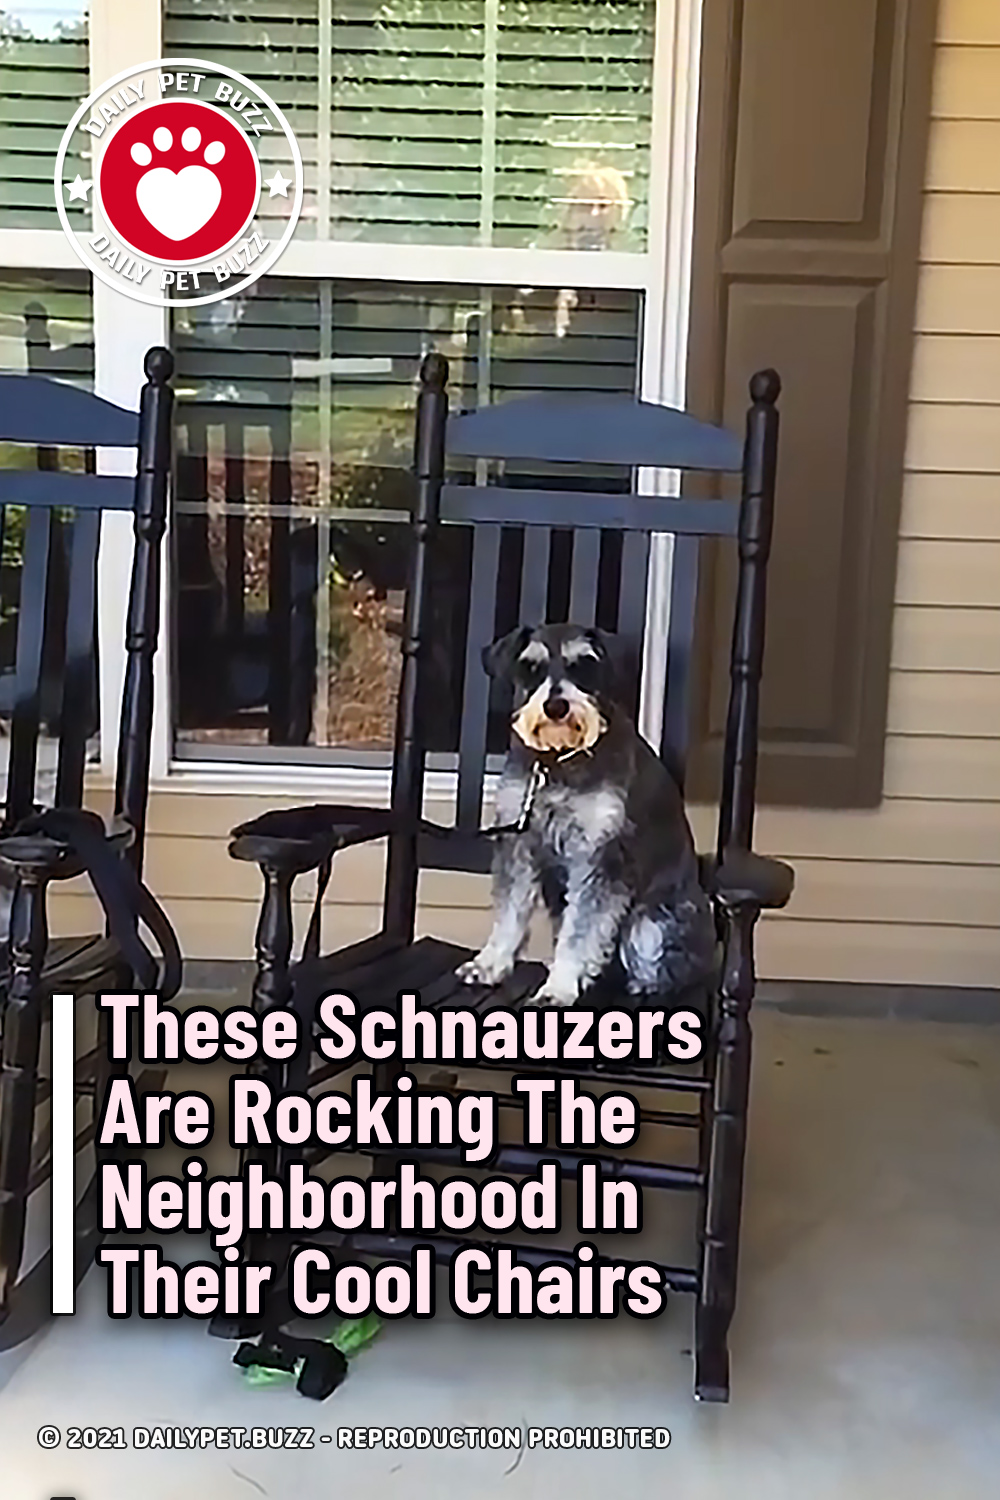 These Schnauzers Are Rocking The Neighborhood In Their Cool Chairs